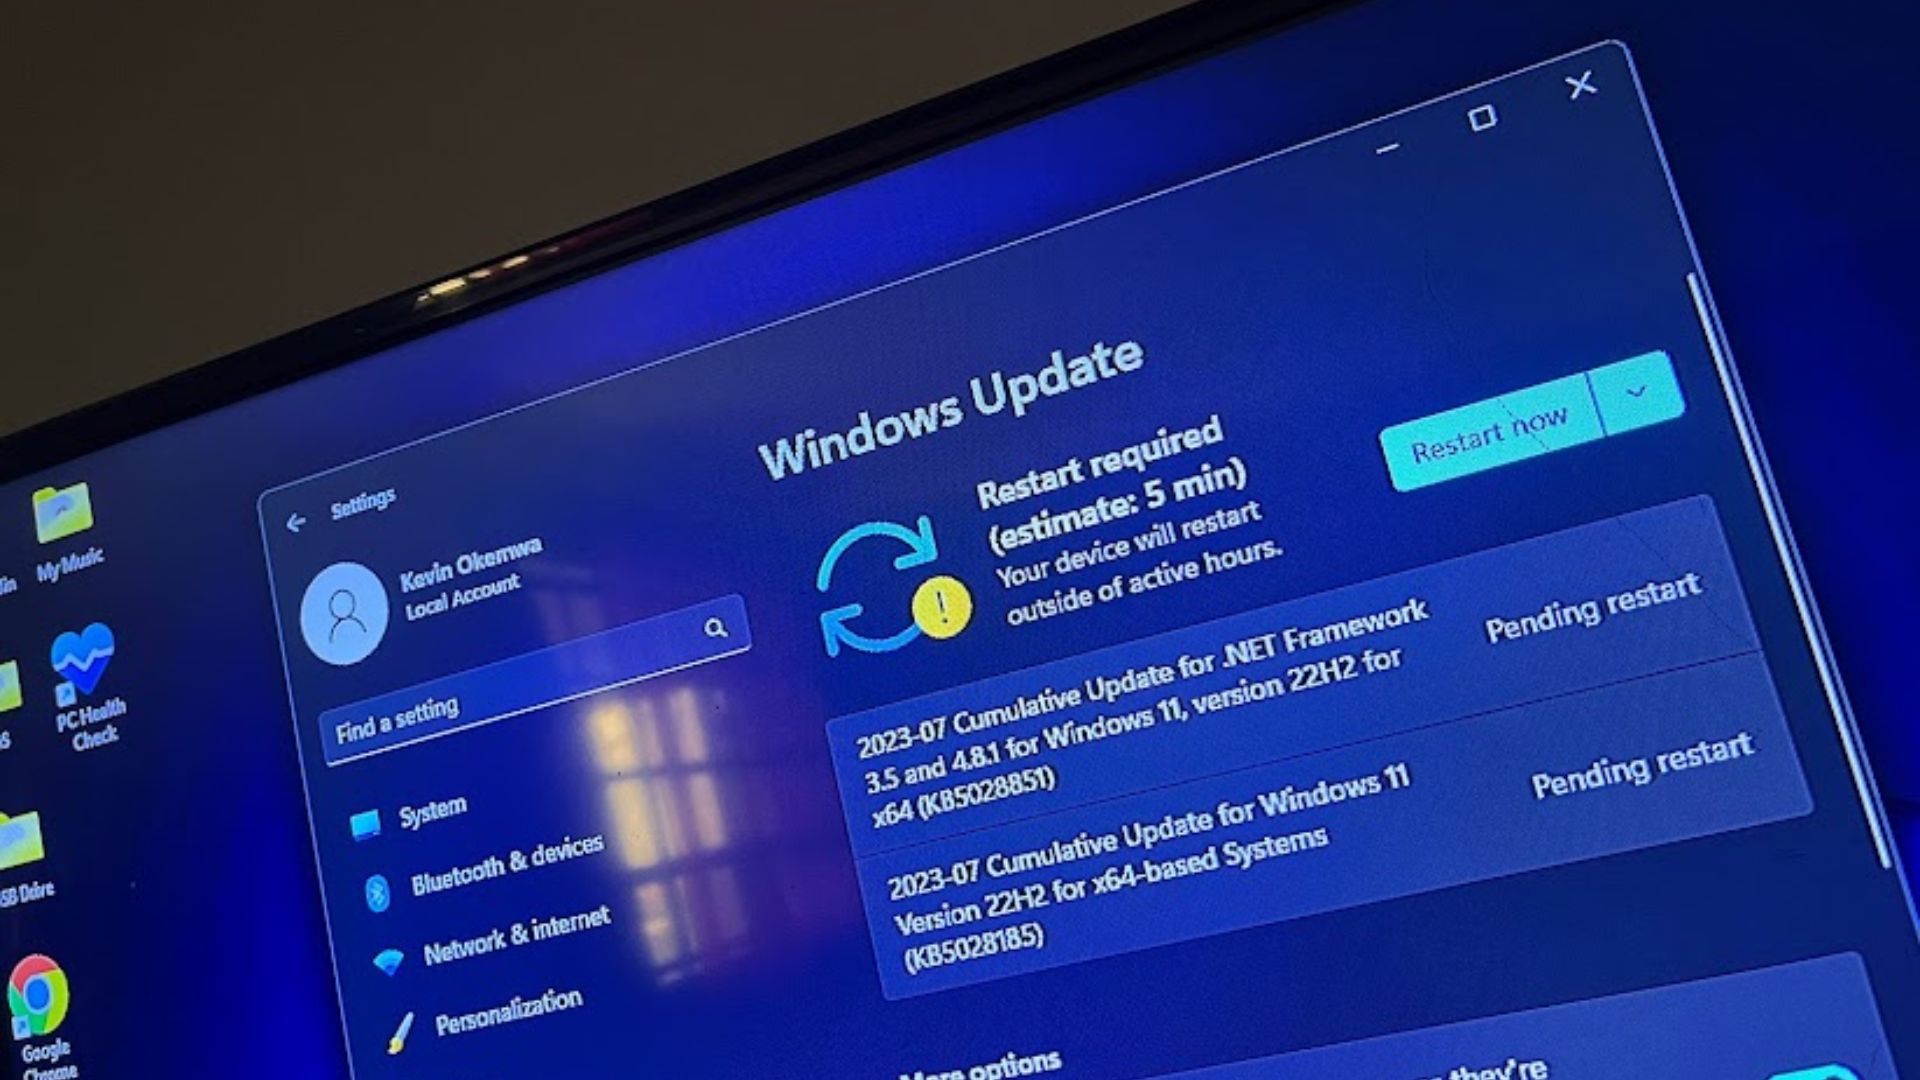 This tiny tool can bring Windows 11 to older PCs